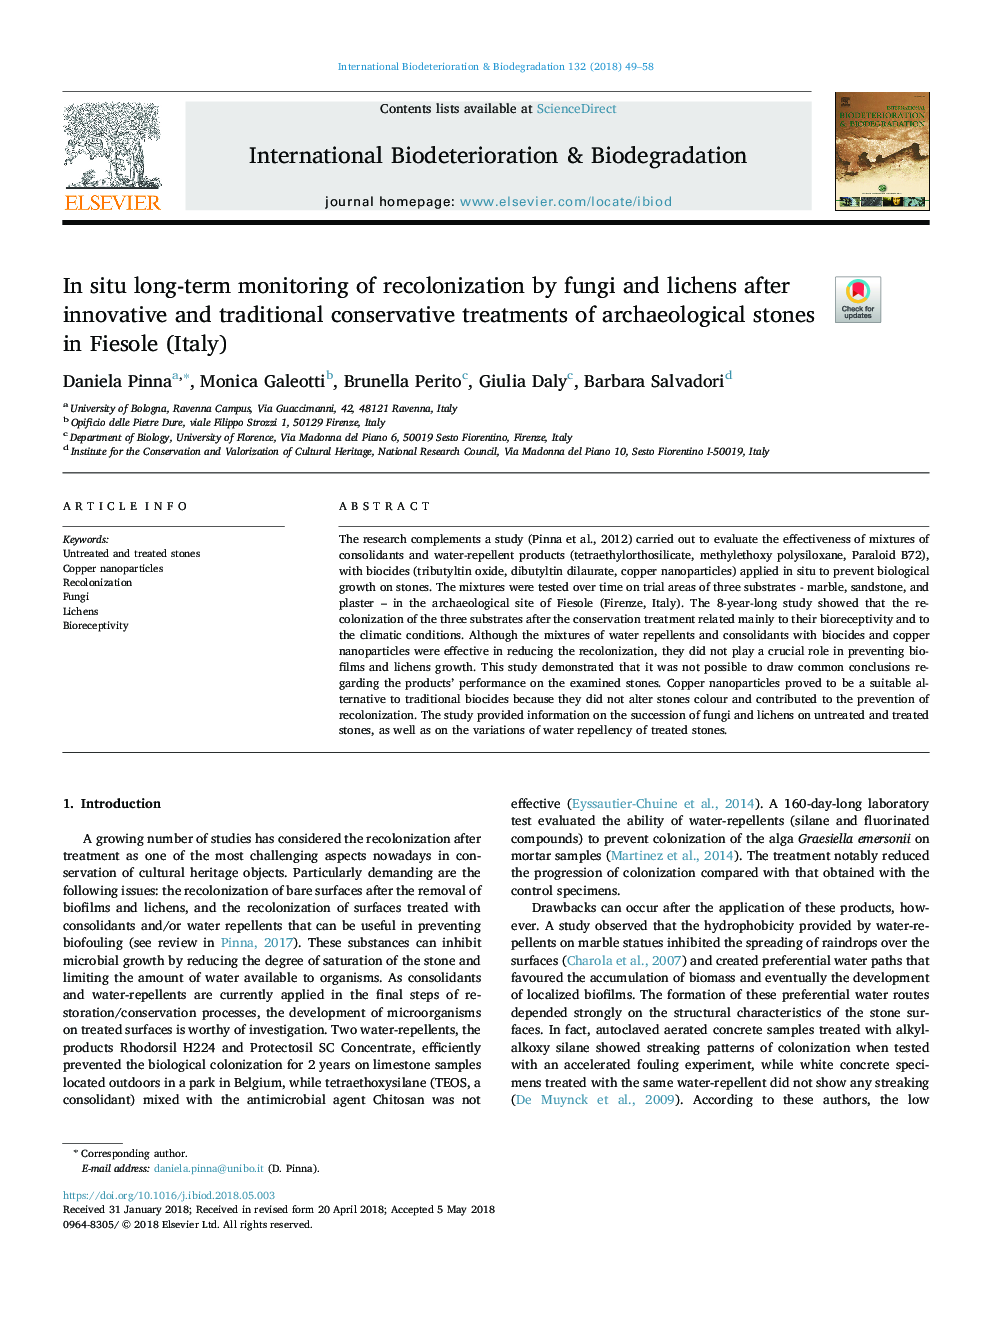 In situ long-term monitoring of recolonization by fungi and lichens after innovative and traditional conservative treatments of archaeological stones in Fiesole (Italy)